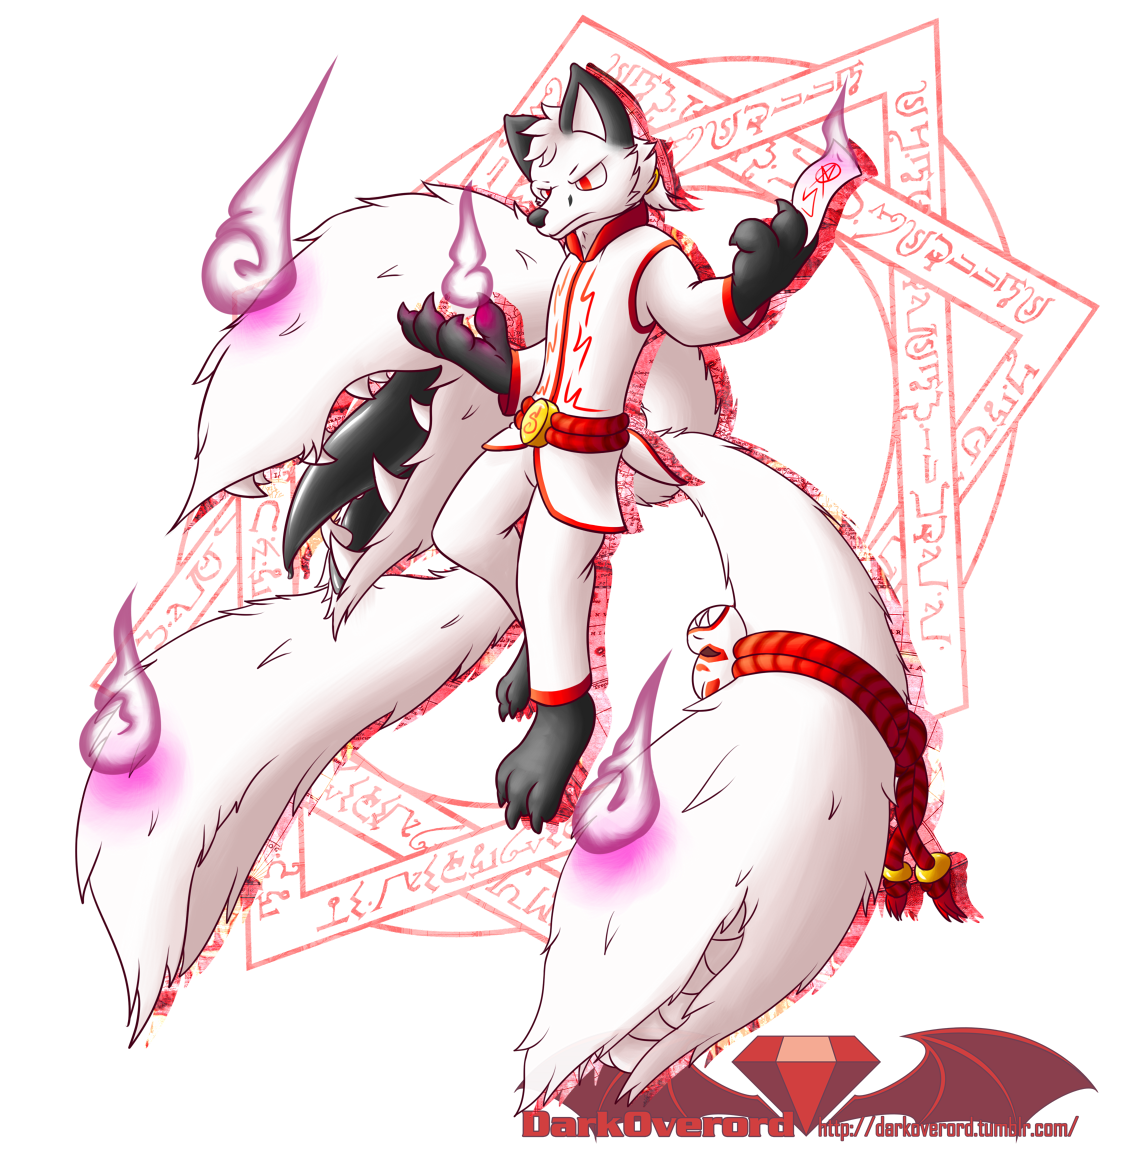 Annai Siru, a white three tailed kitsune (all three of which have tailmaws), hovers in the air looking grumpily down to something off the image. They're holding a wisp in one hand and a slip of paper intended to be a spell card in the other. Behind them is a magic circle.